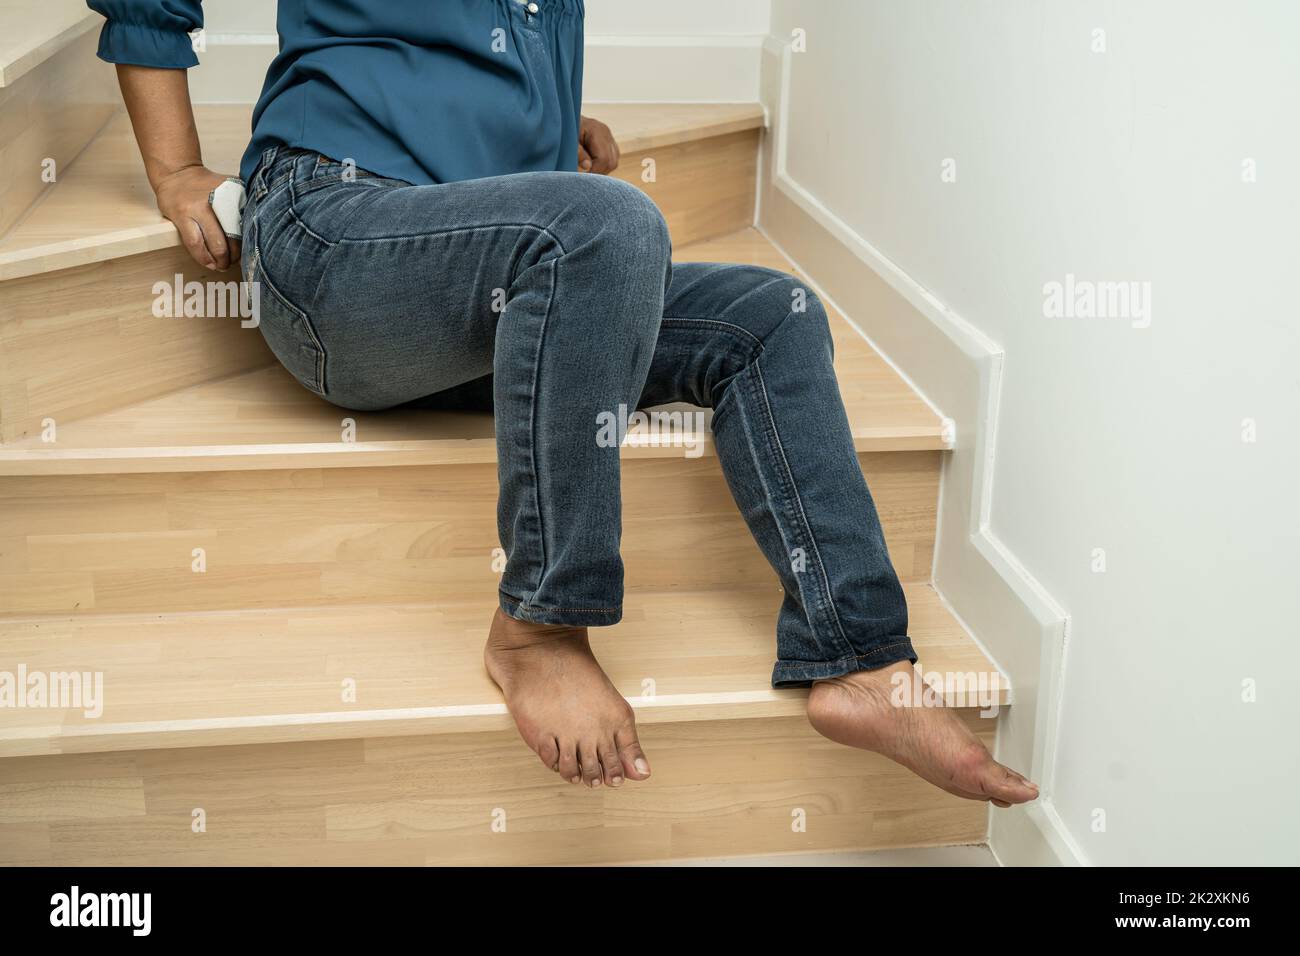 Asian lady woman patient fall down the stairs because slippery surfaces Stock Photo